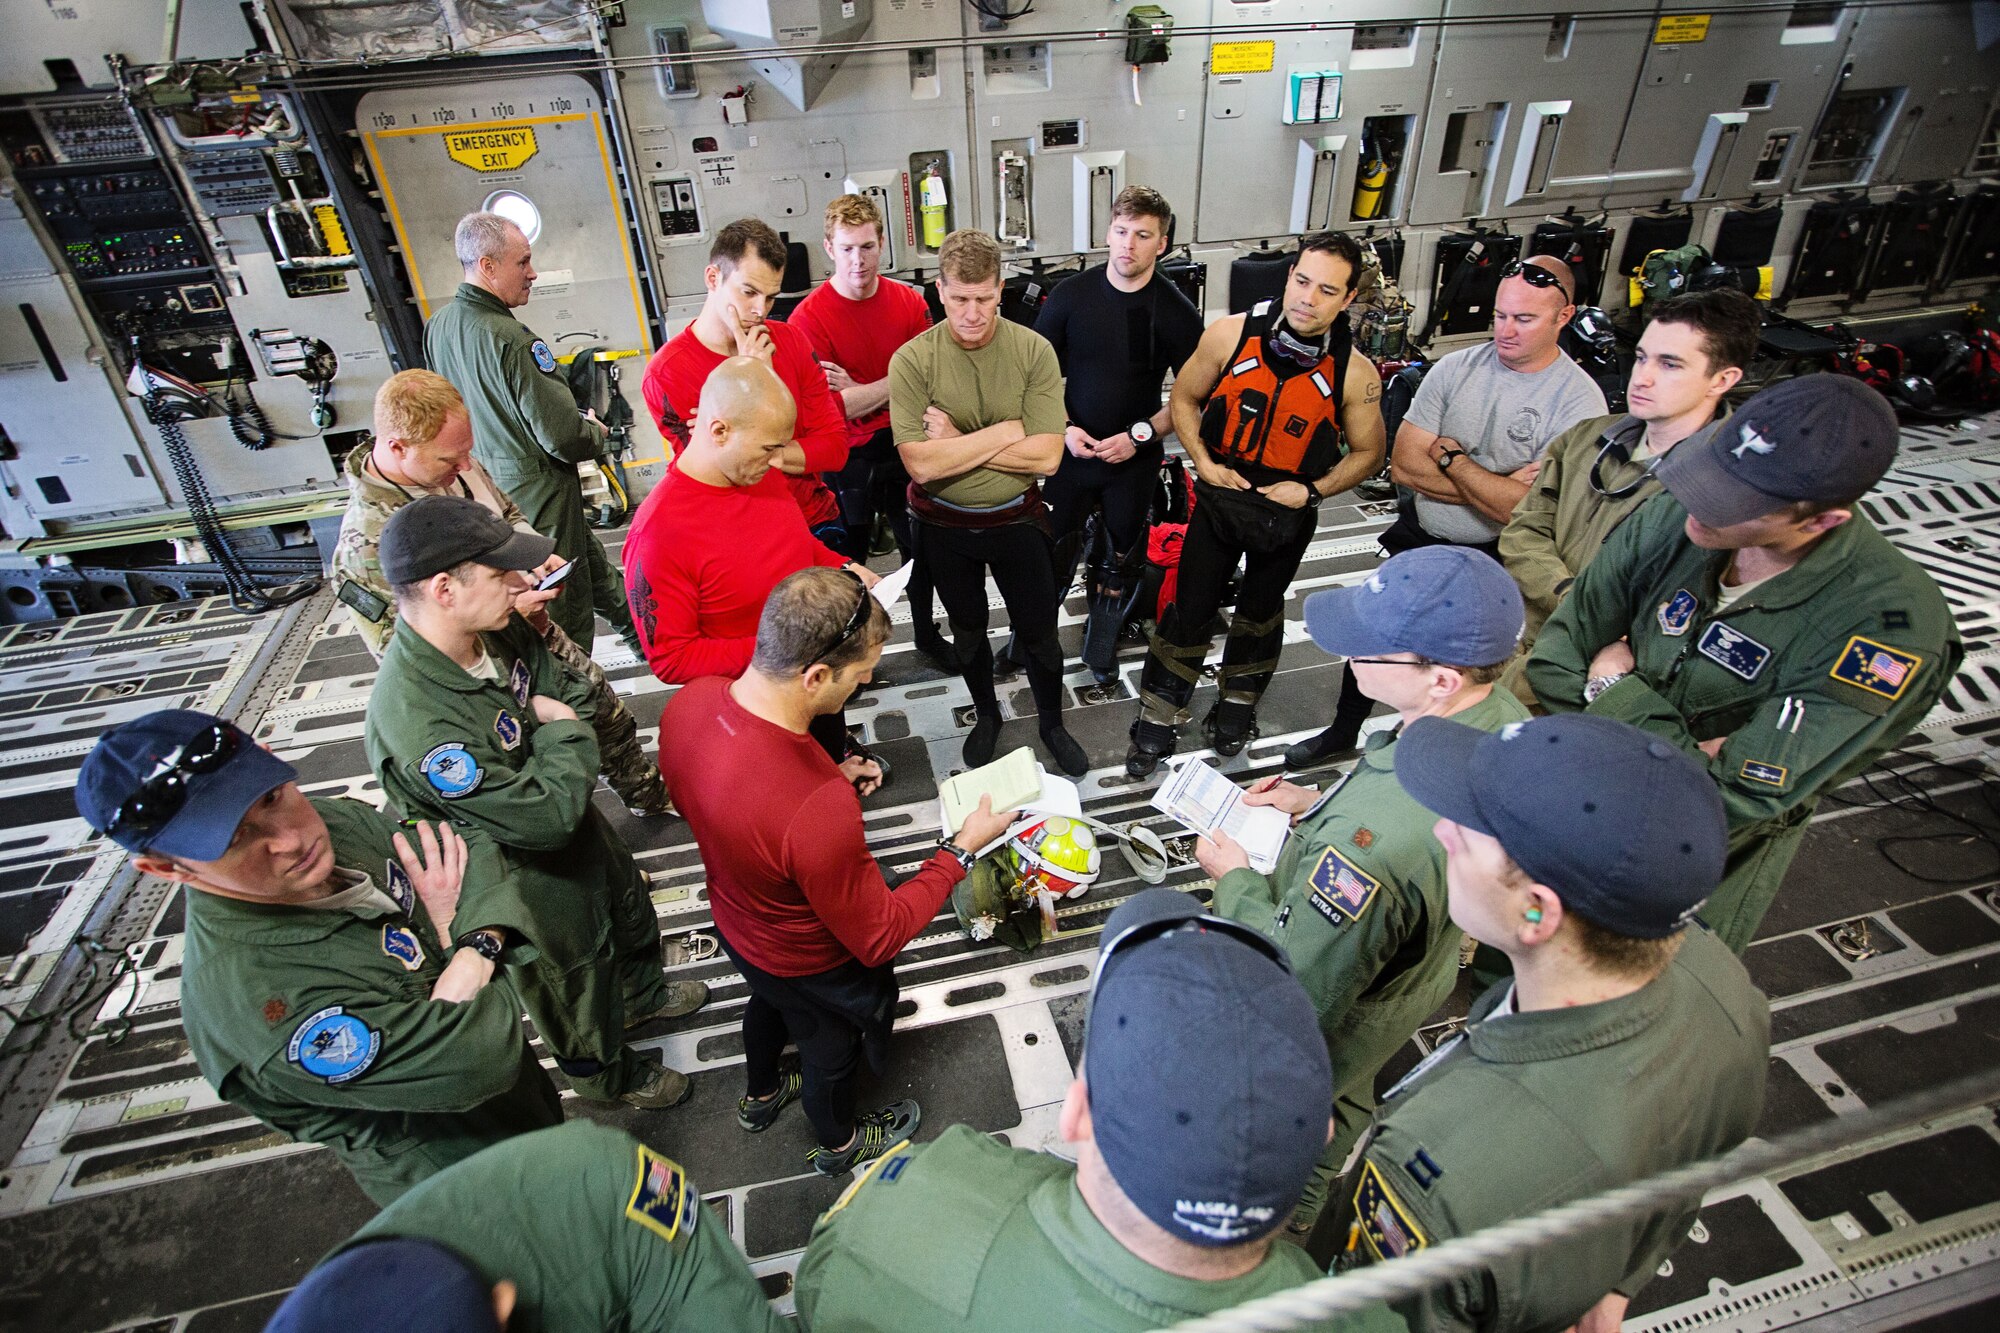 Members of the 920th Rescue Wing and the 249th Airlift Squadron conduct a pre-mission briefing aboard a C-17 Globemaster III aircraft at Patrick Air Force Base, Fla., Jan. 14 before departing for a simulated astronaut rescue mission. The 249th AS worked with NASA, the 920th Rescue Wing, the 45th Space Wing and Detachment 3 of the 45th Operations Group to develop tactics, training and procedures to quickly and safely recover astronauts in the event they would need to abort their spacecraft. (Courtesy photo by Senior Airman Zac Heinen)